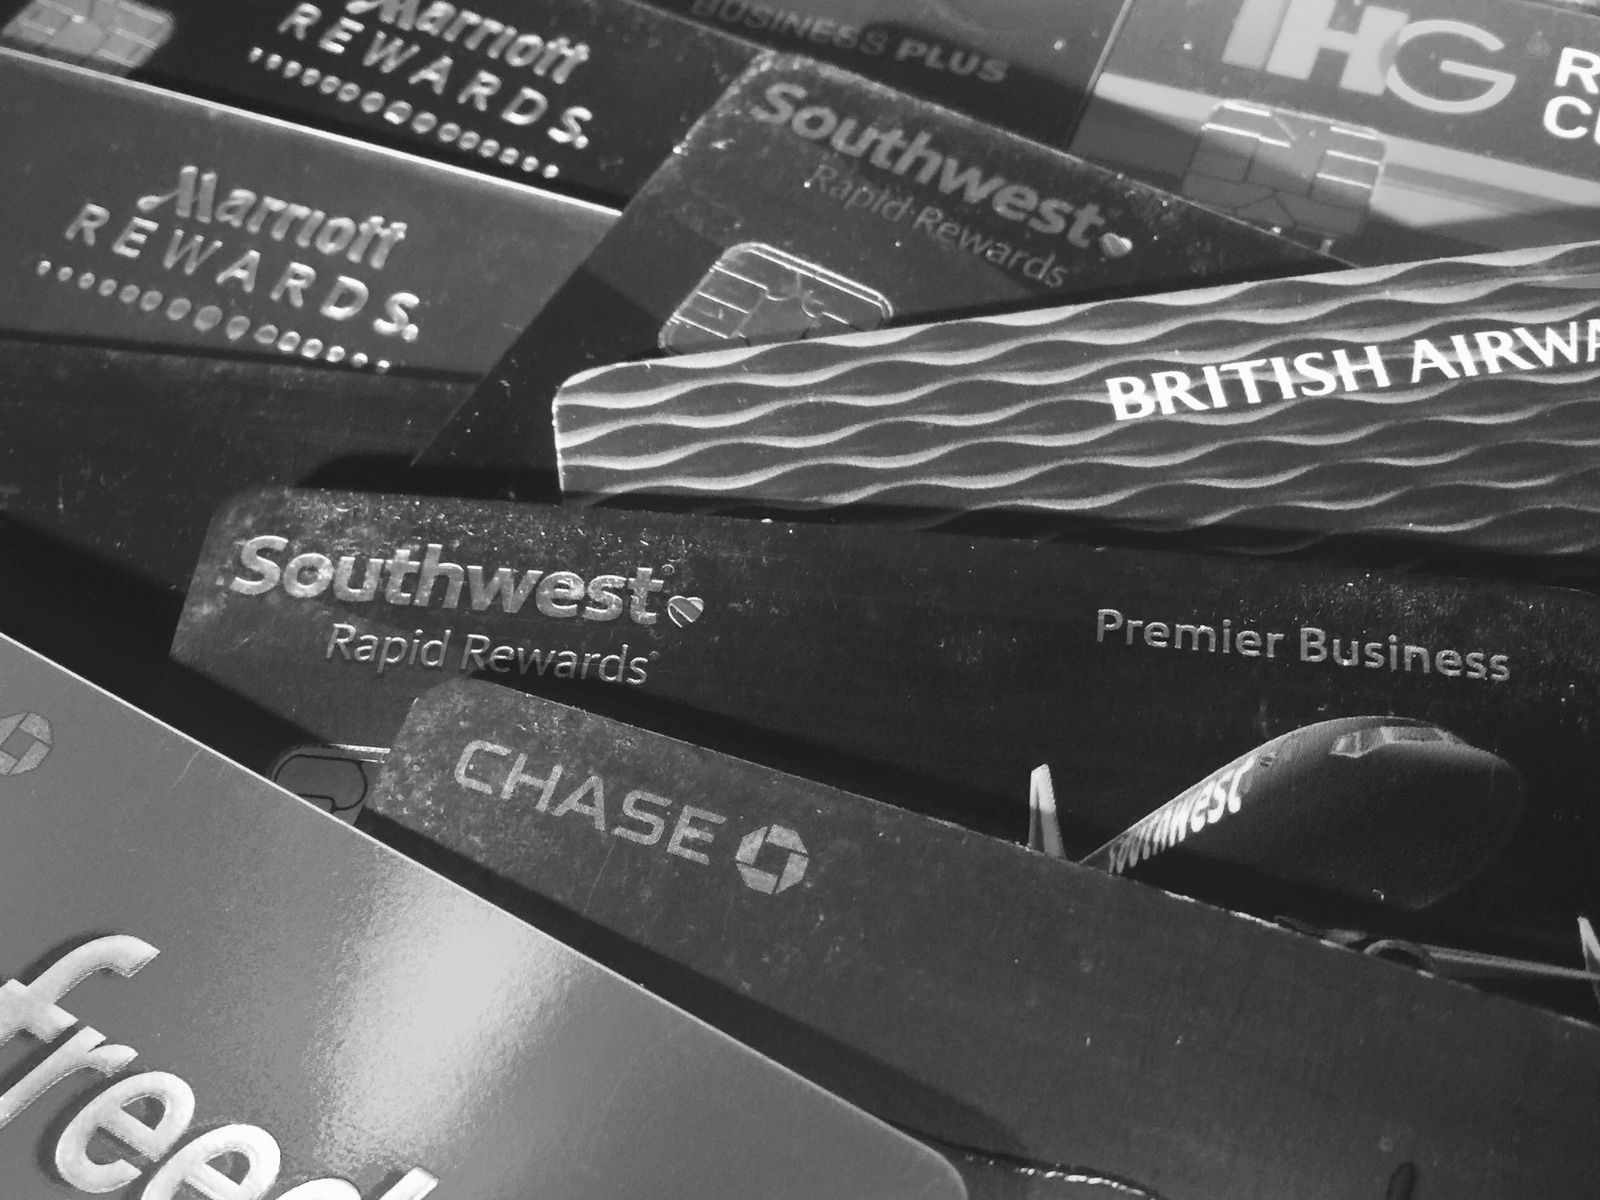 Chase credit cards black and white 1600x1200 1